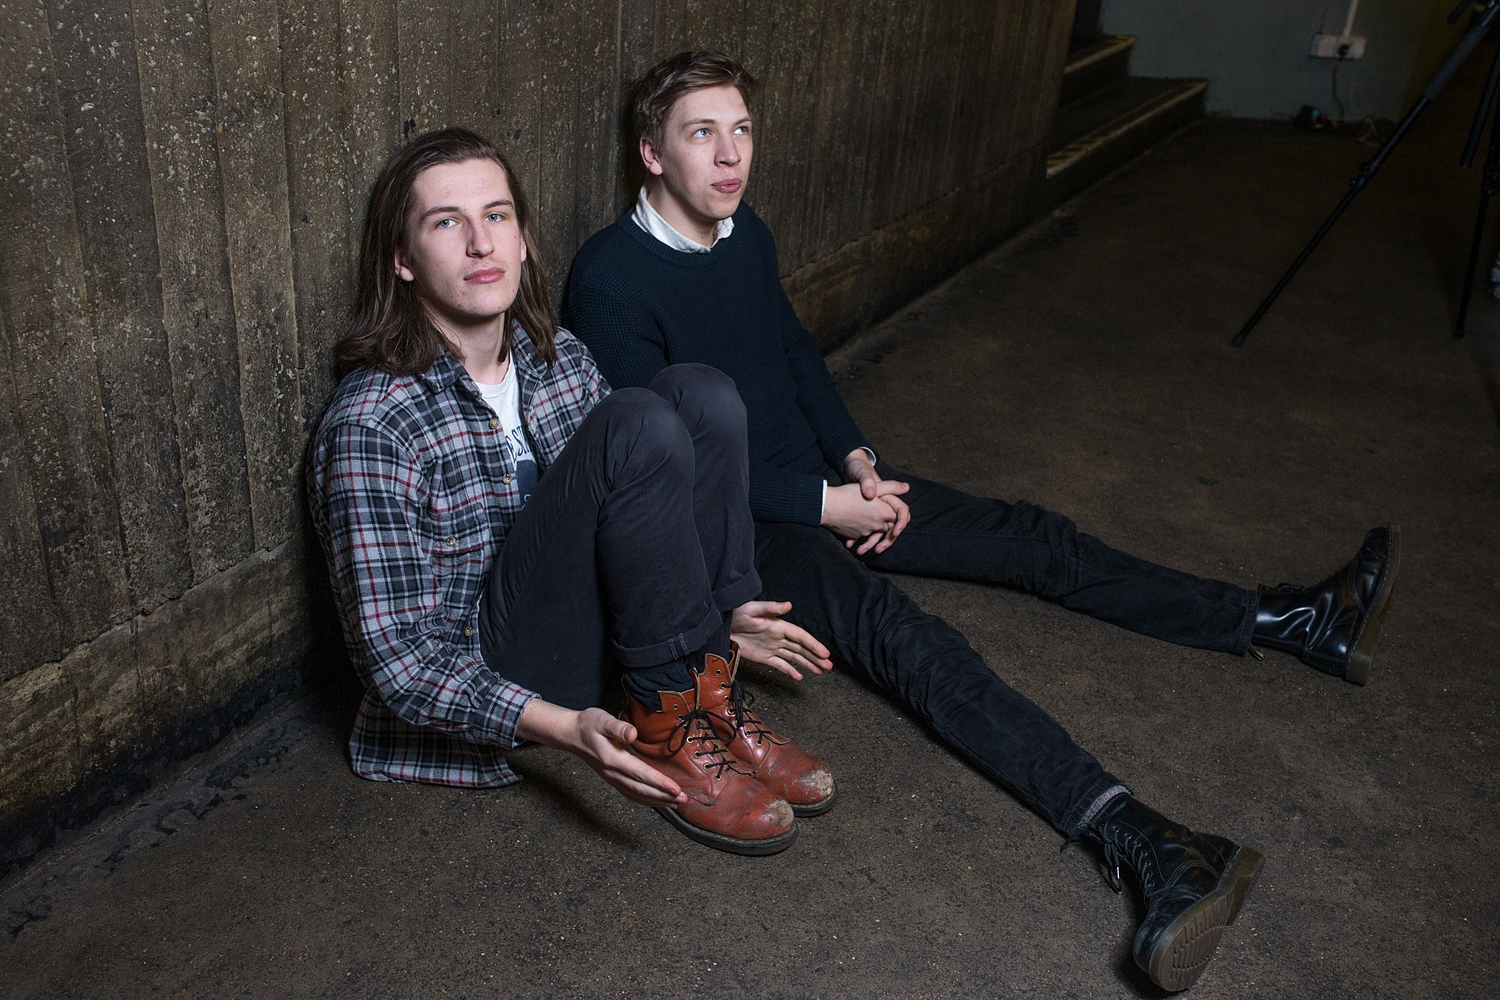 Drenge talk jazz covers bands, "waning self integrity" and Periscoping baglama players in Turkey